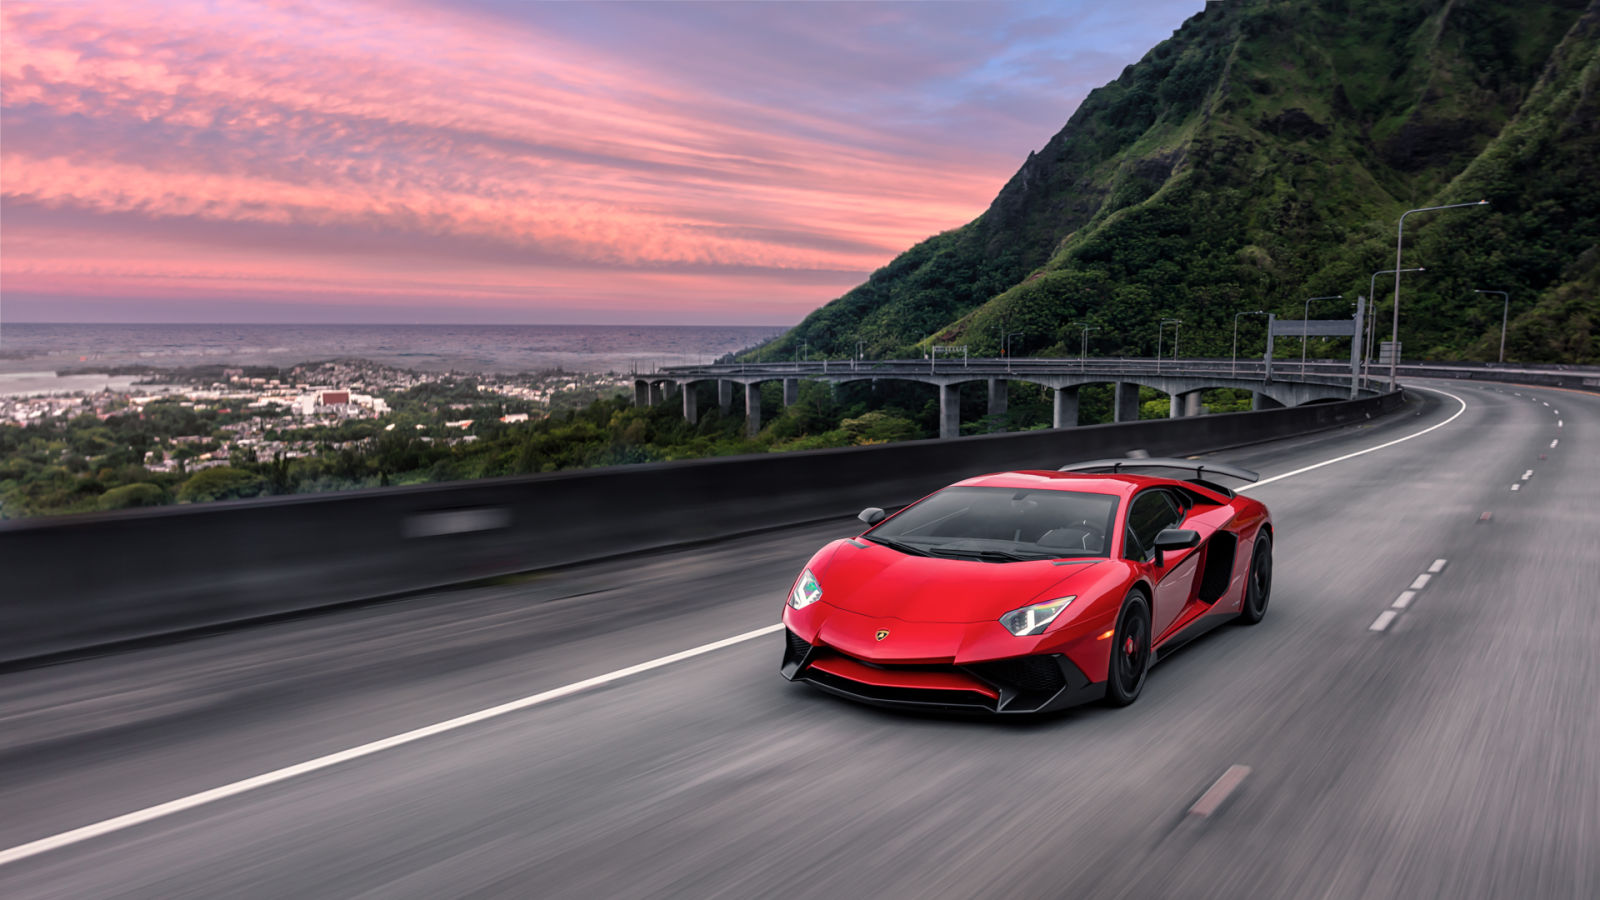 Your Ridiculously Awesome Lamborghini Aventador Sv Wallpaper Are Here